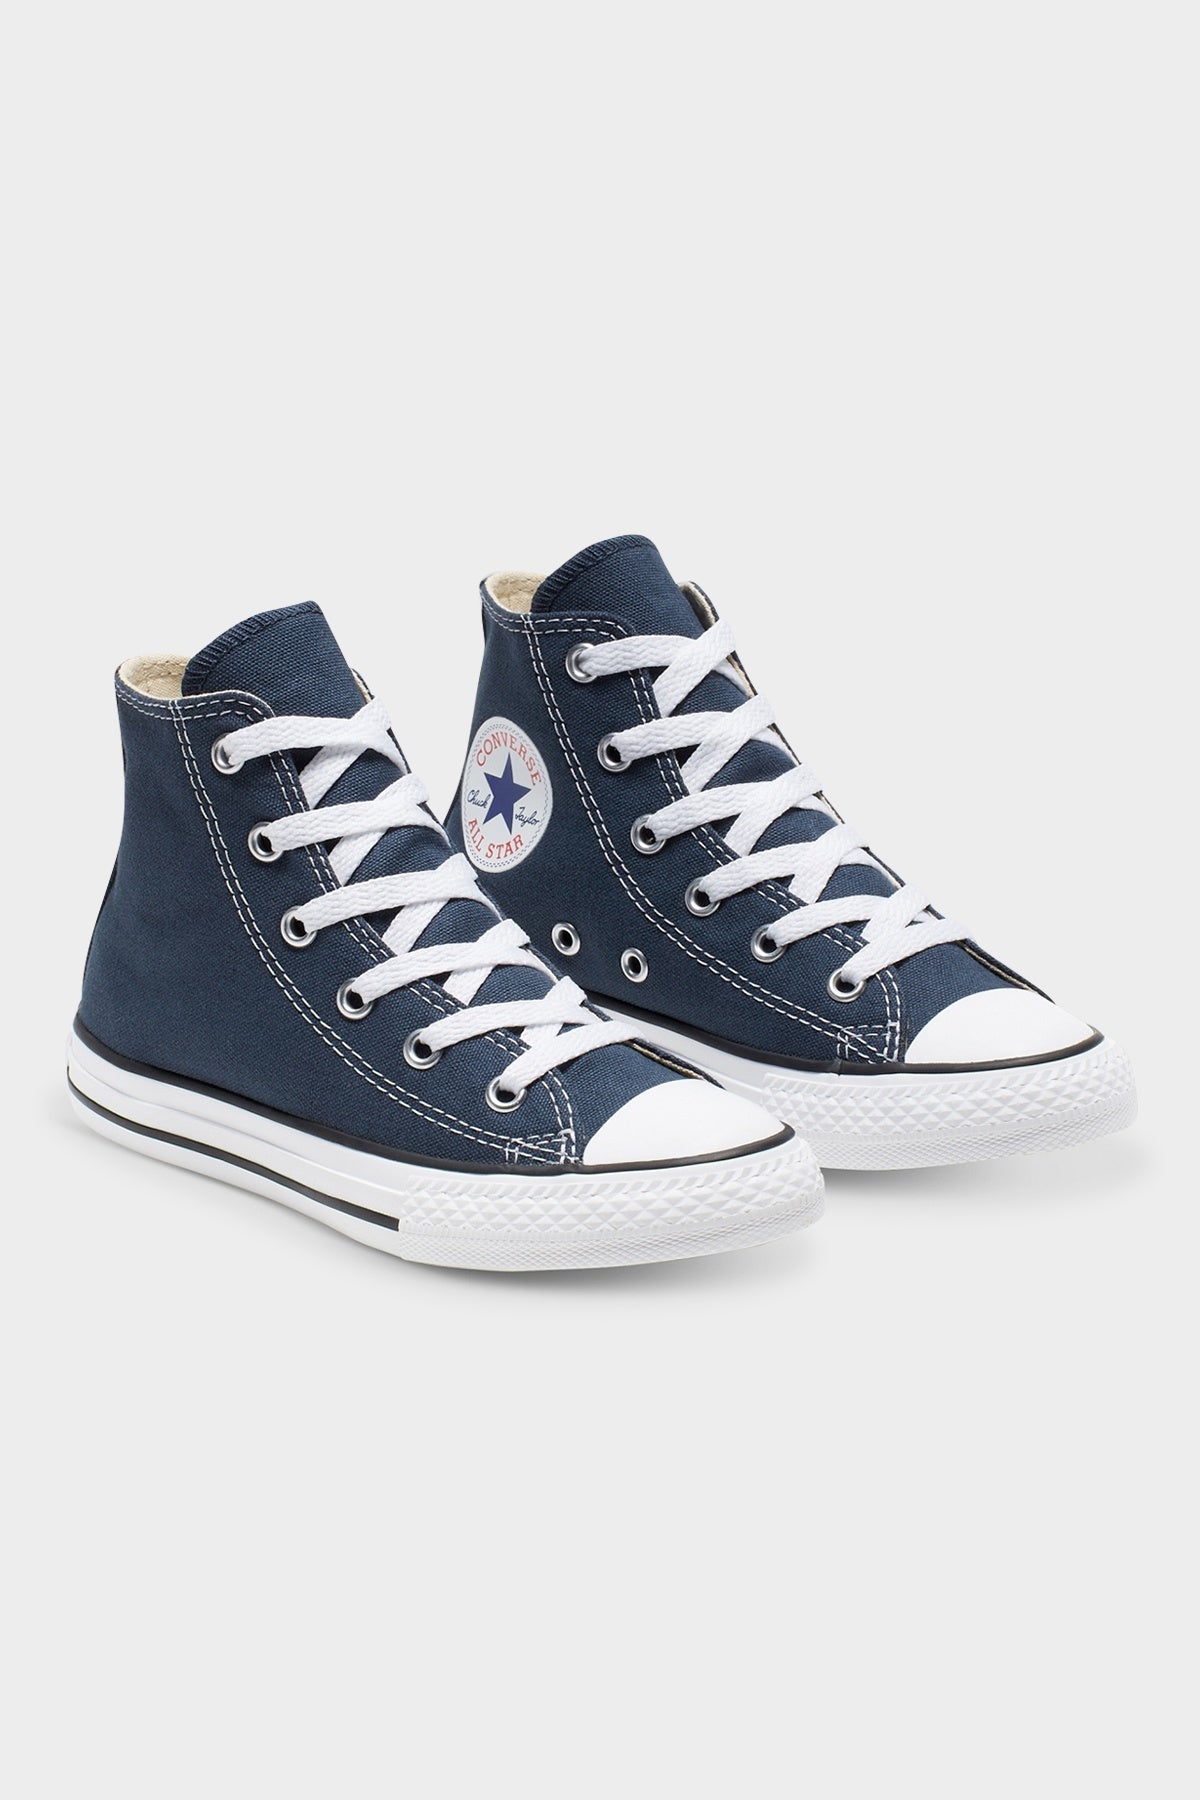 Converse Youth CT All Star Core Canvas Hi Navy